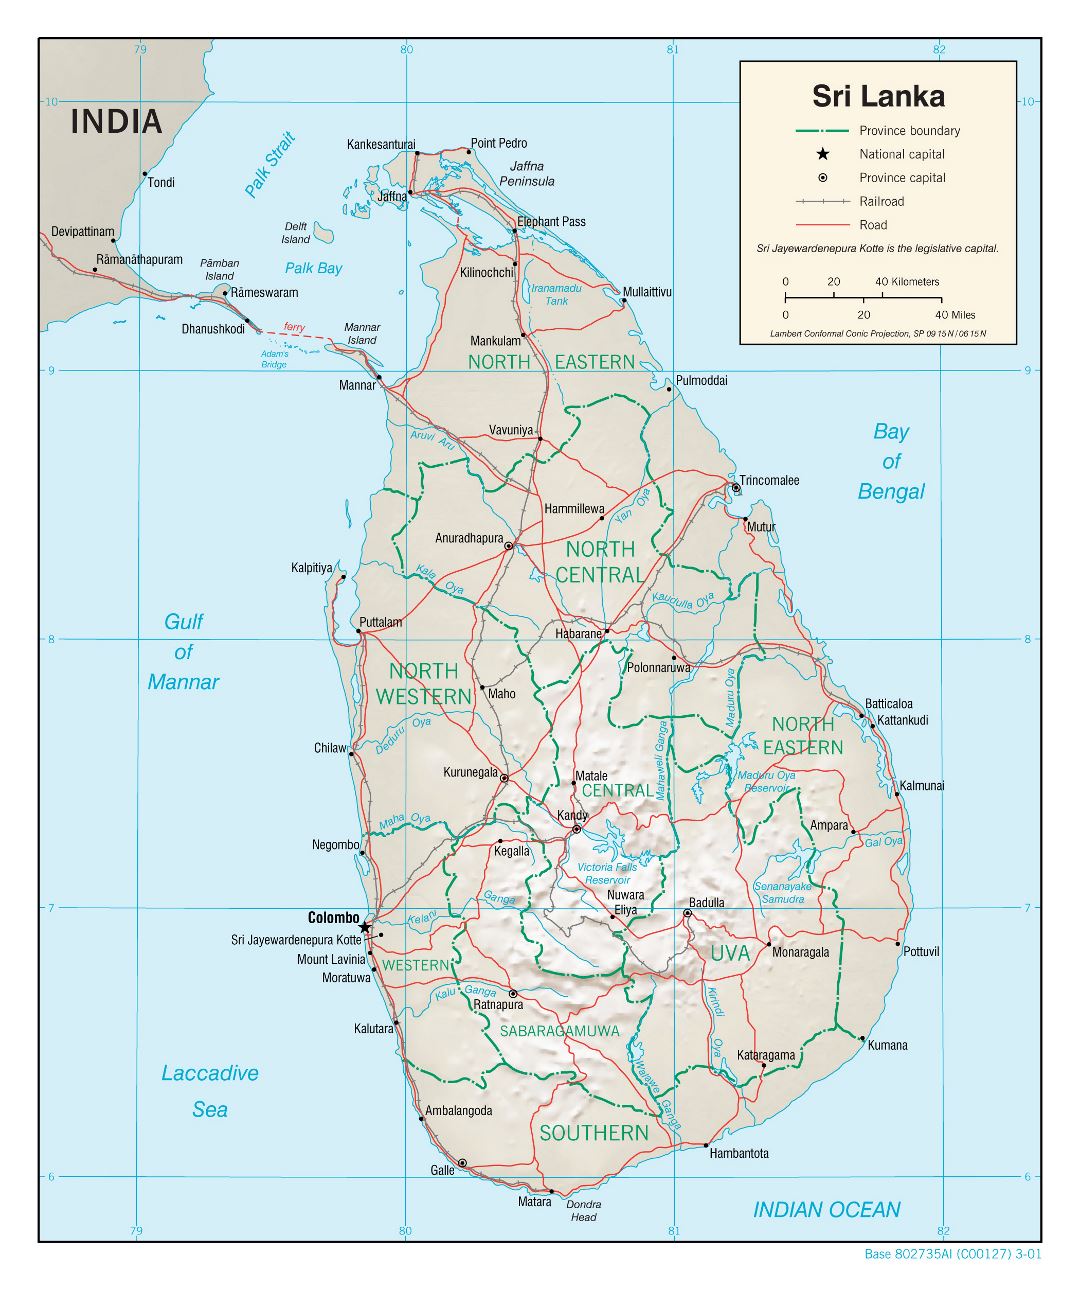 Large political and administrative map of Sri Lanka with relief, roads, railroads and major cities - 2001